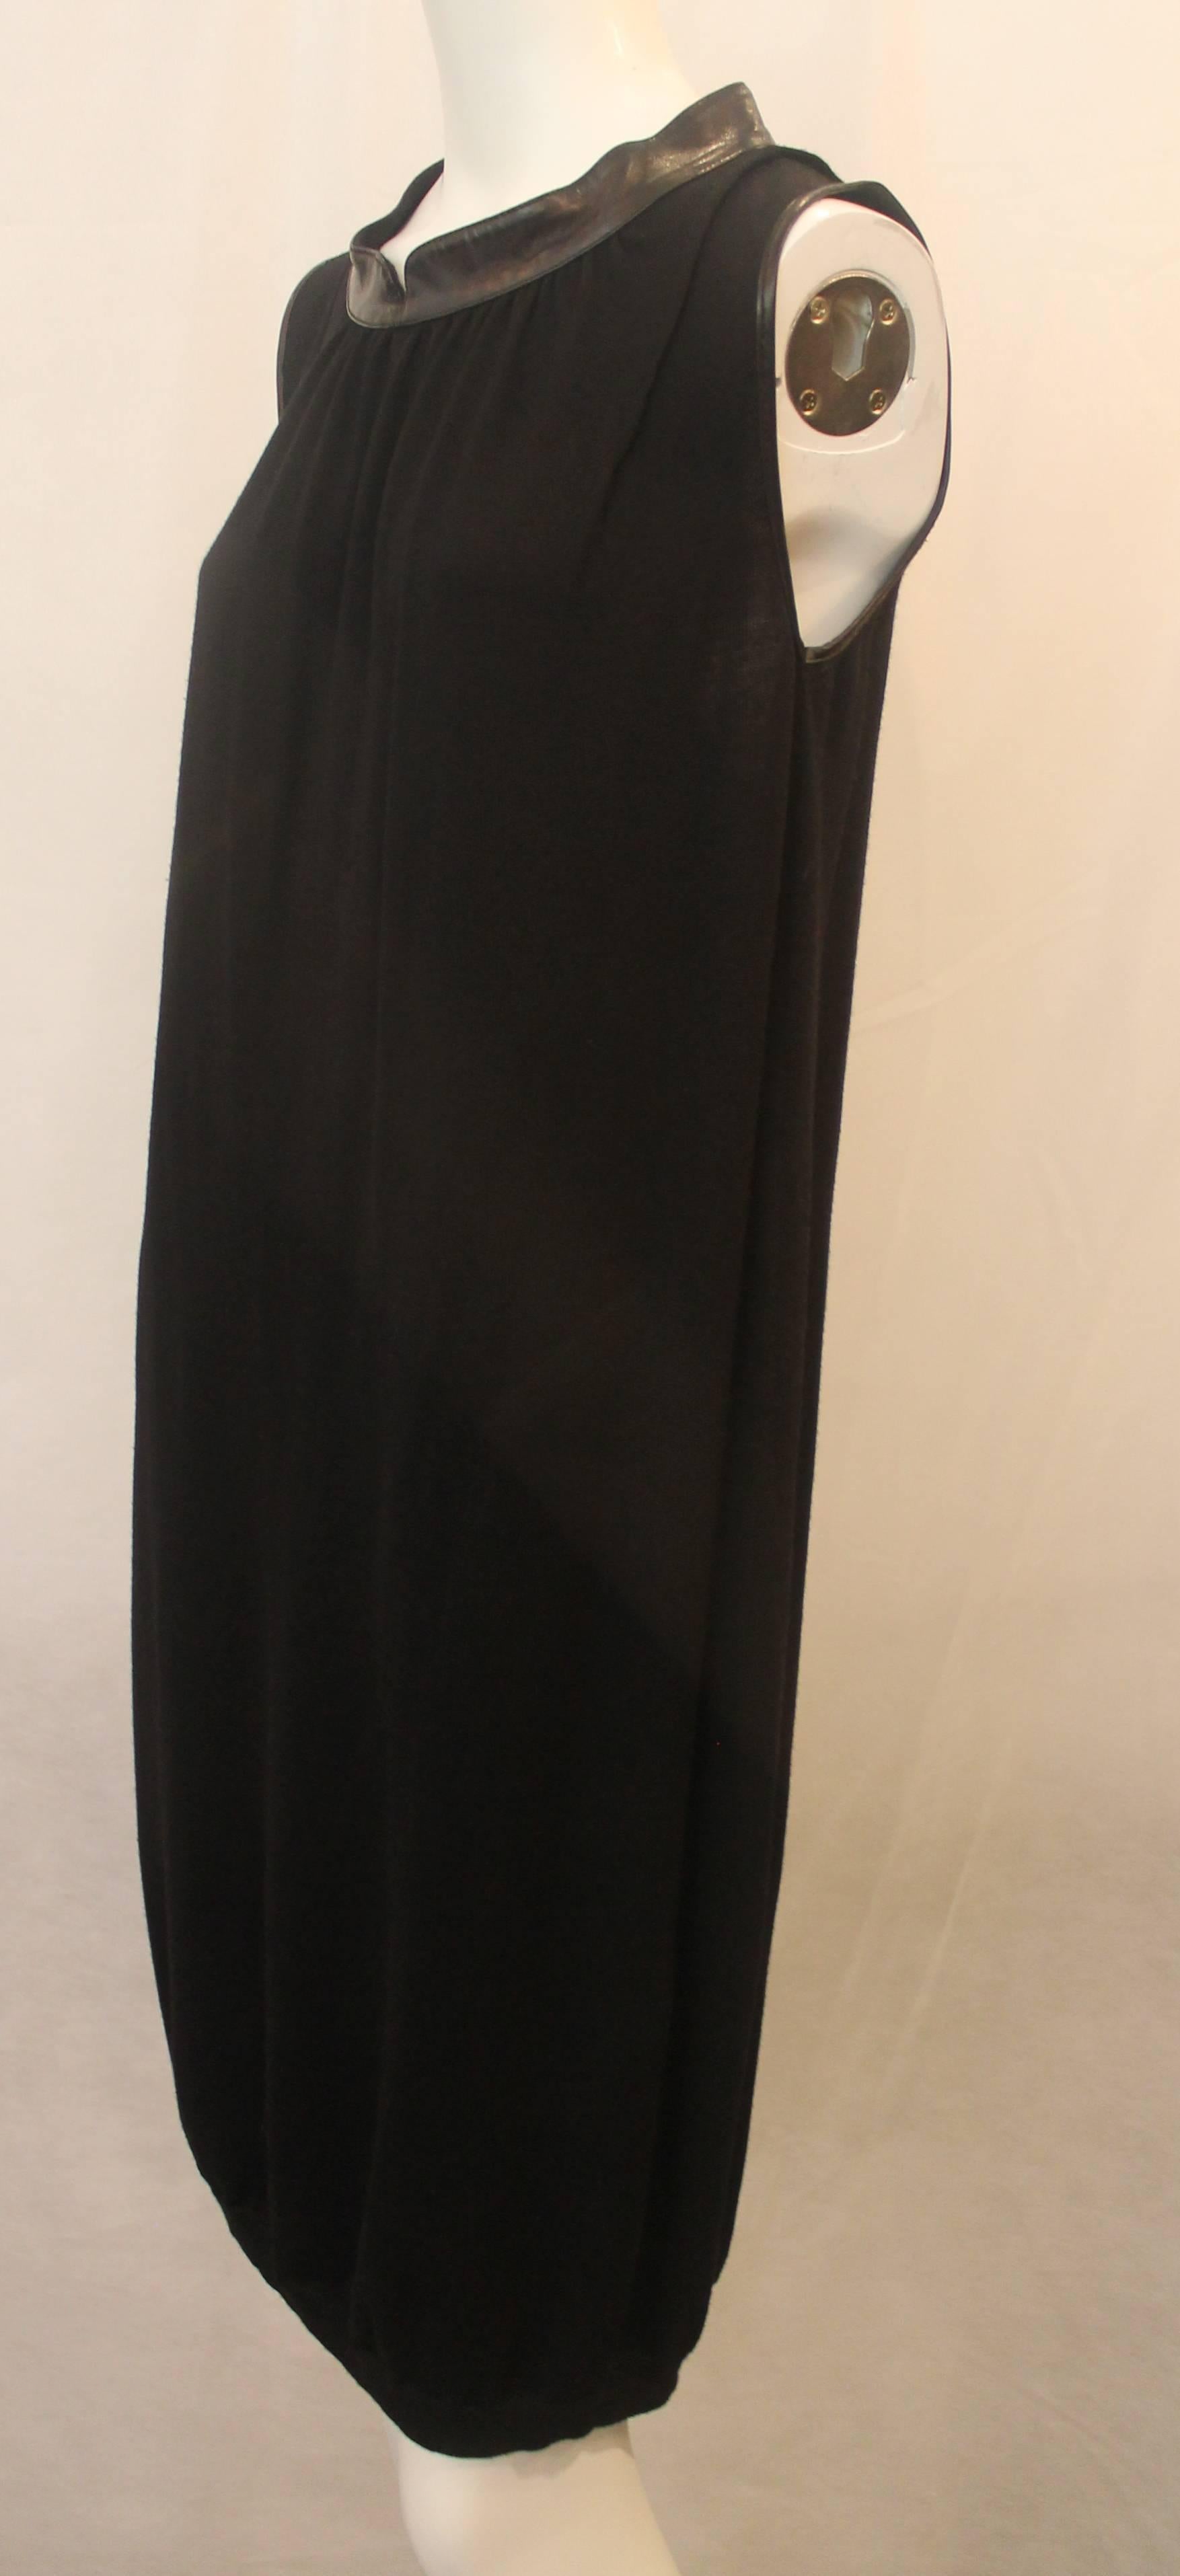 Yves Saint Laurent Black Wool Sleeveless Knit Shift Dress with Leather Collar -M. This beautiful sleeveless dress is a trendy twist on a classic look! It is black knitted wool with leather trim around the arm holes and neck. It is in good condition